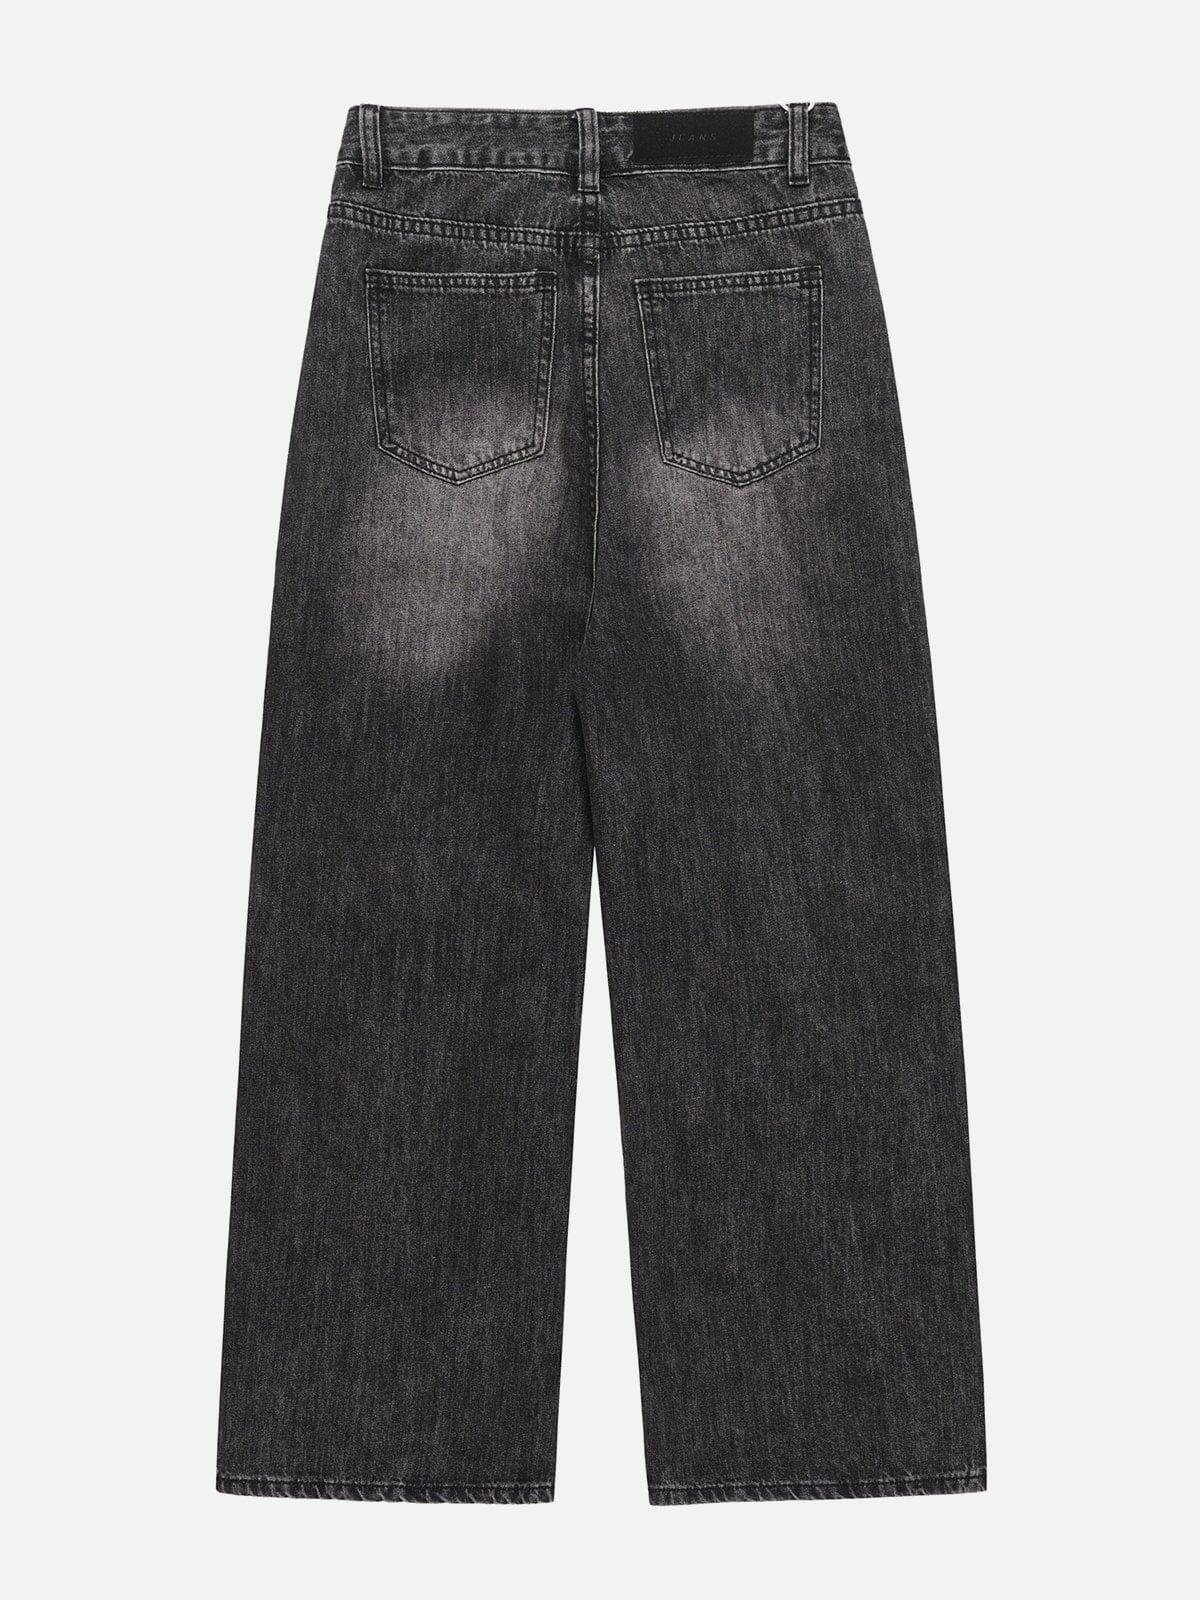 NEV Washed Distressed Solid Jeans